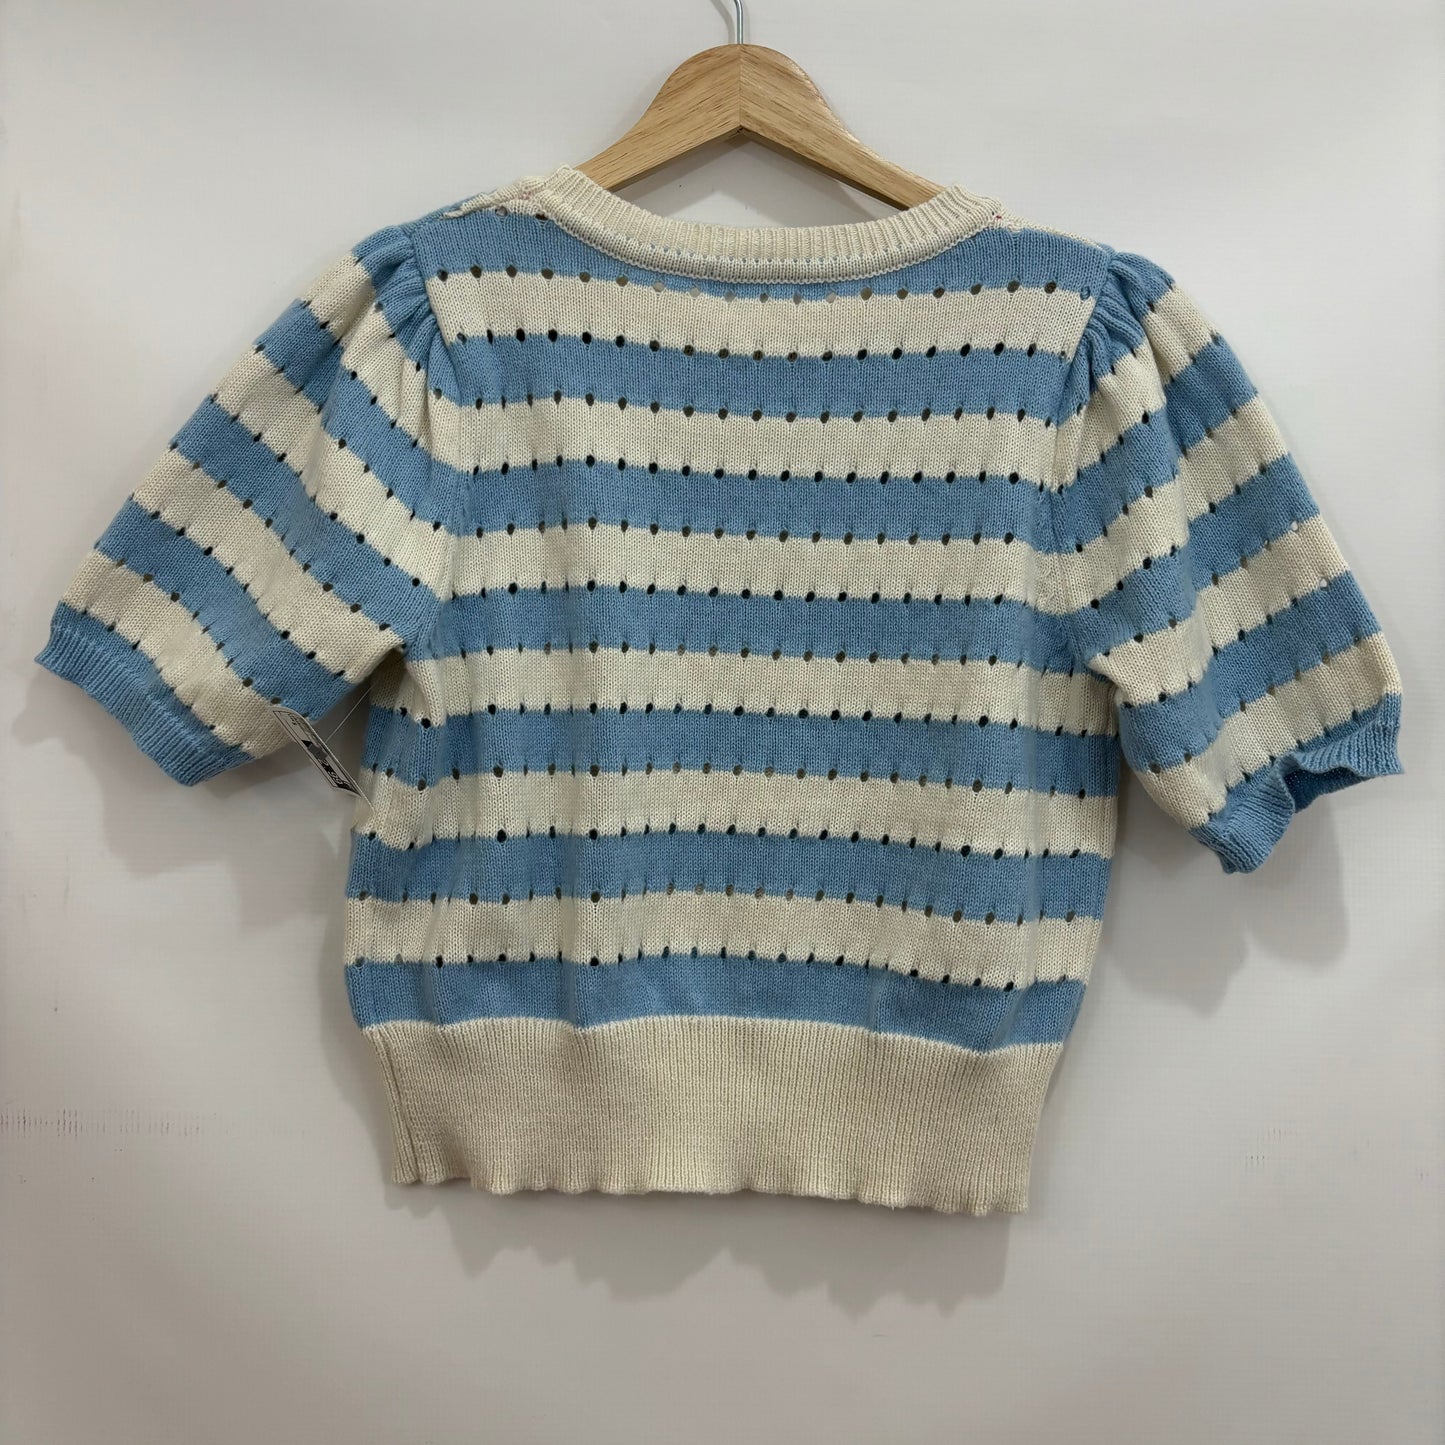 Striped Pattern Sweater Short Sleeve Clothes Mentor, Size S